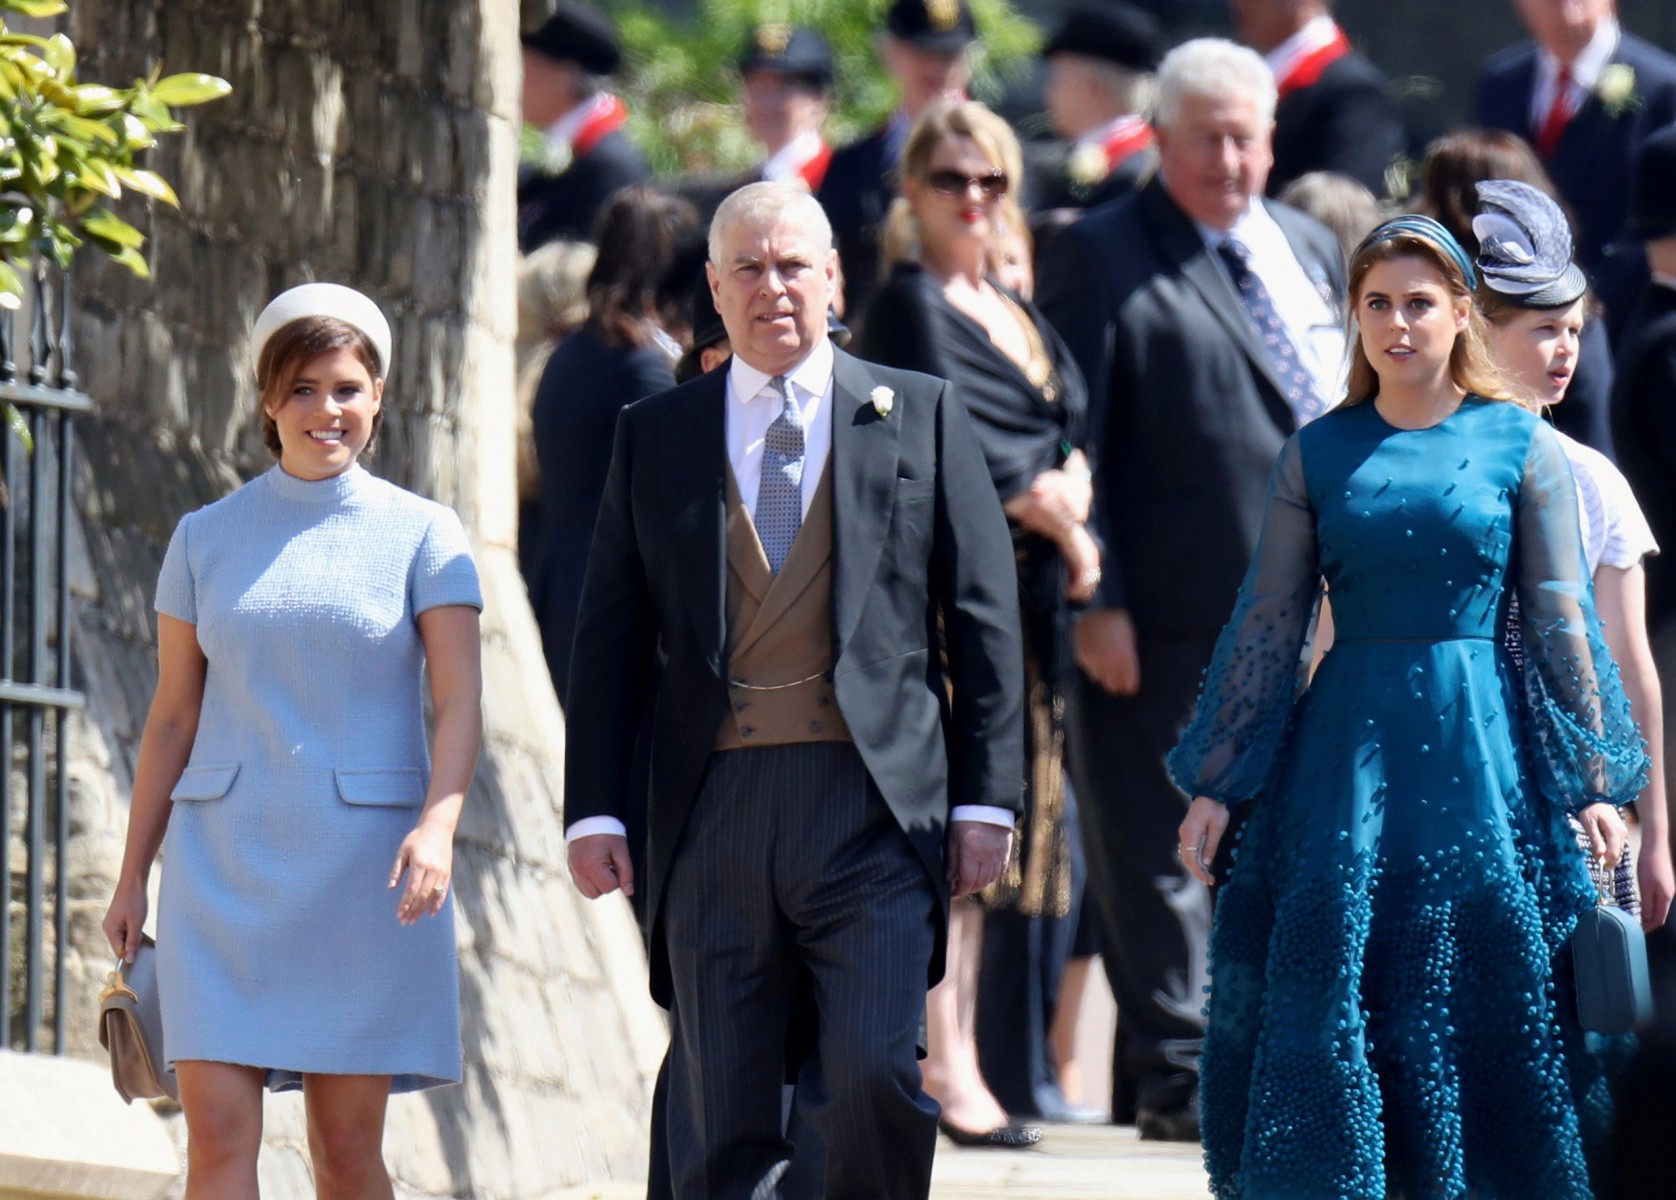 Prince Andrew is pictured arriving at Harry and Meghan's wedding